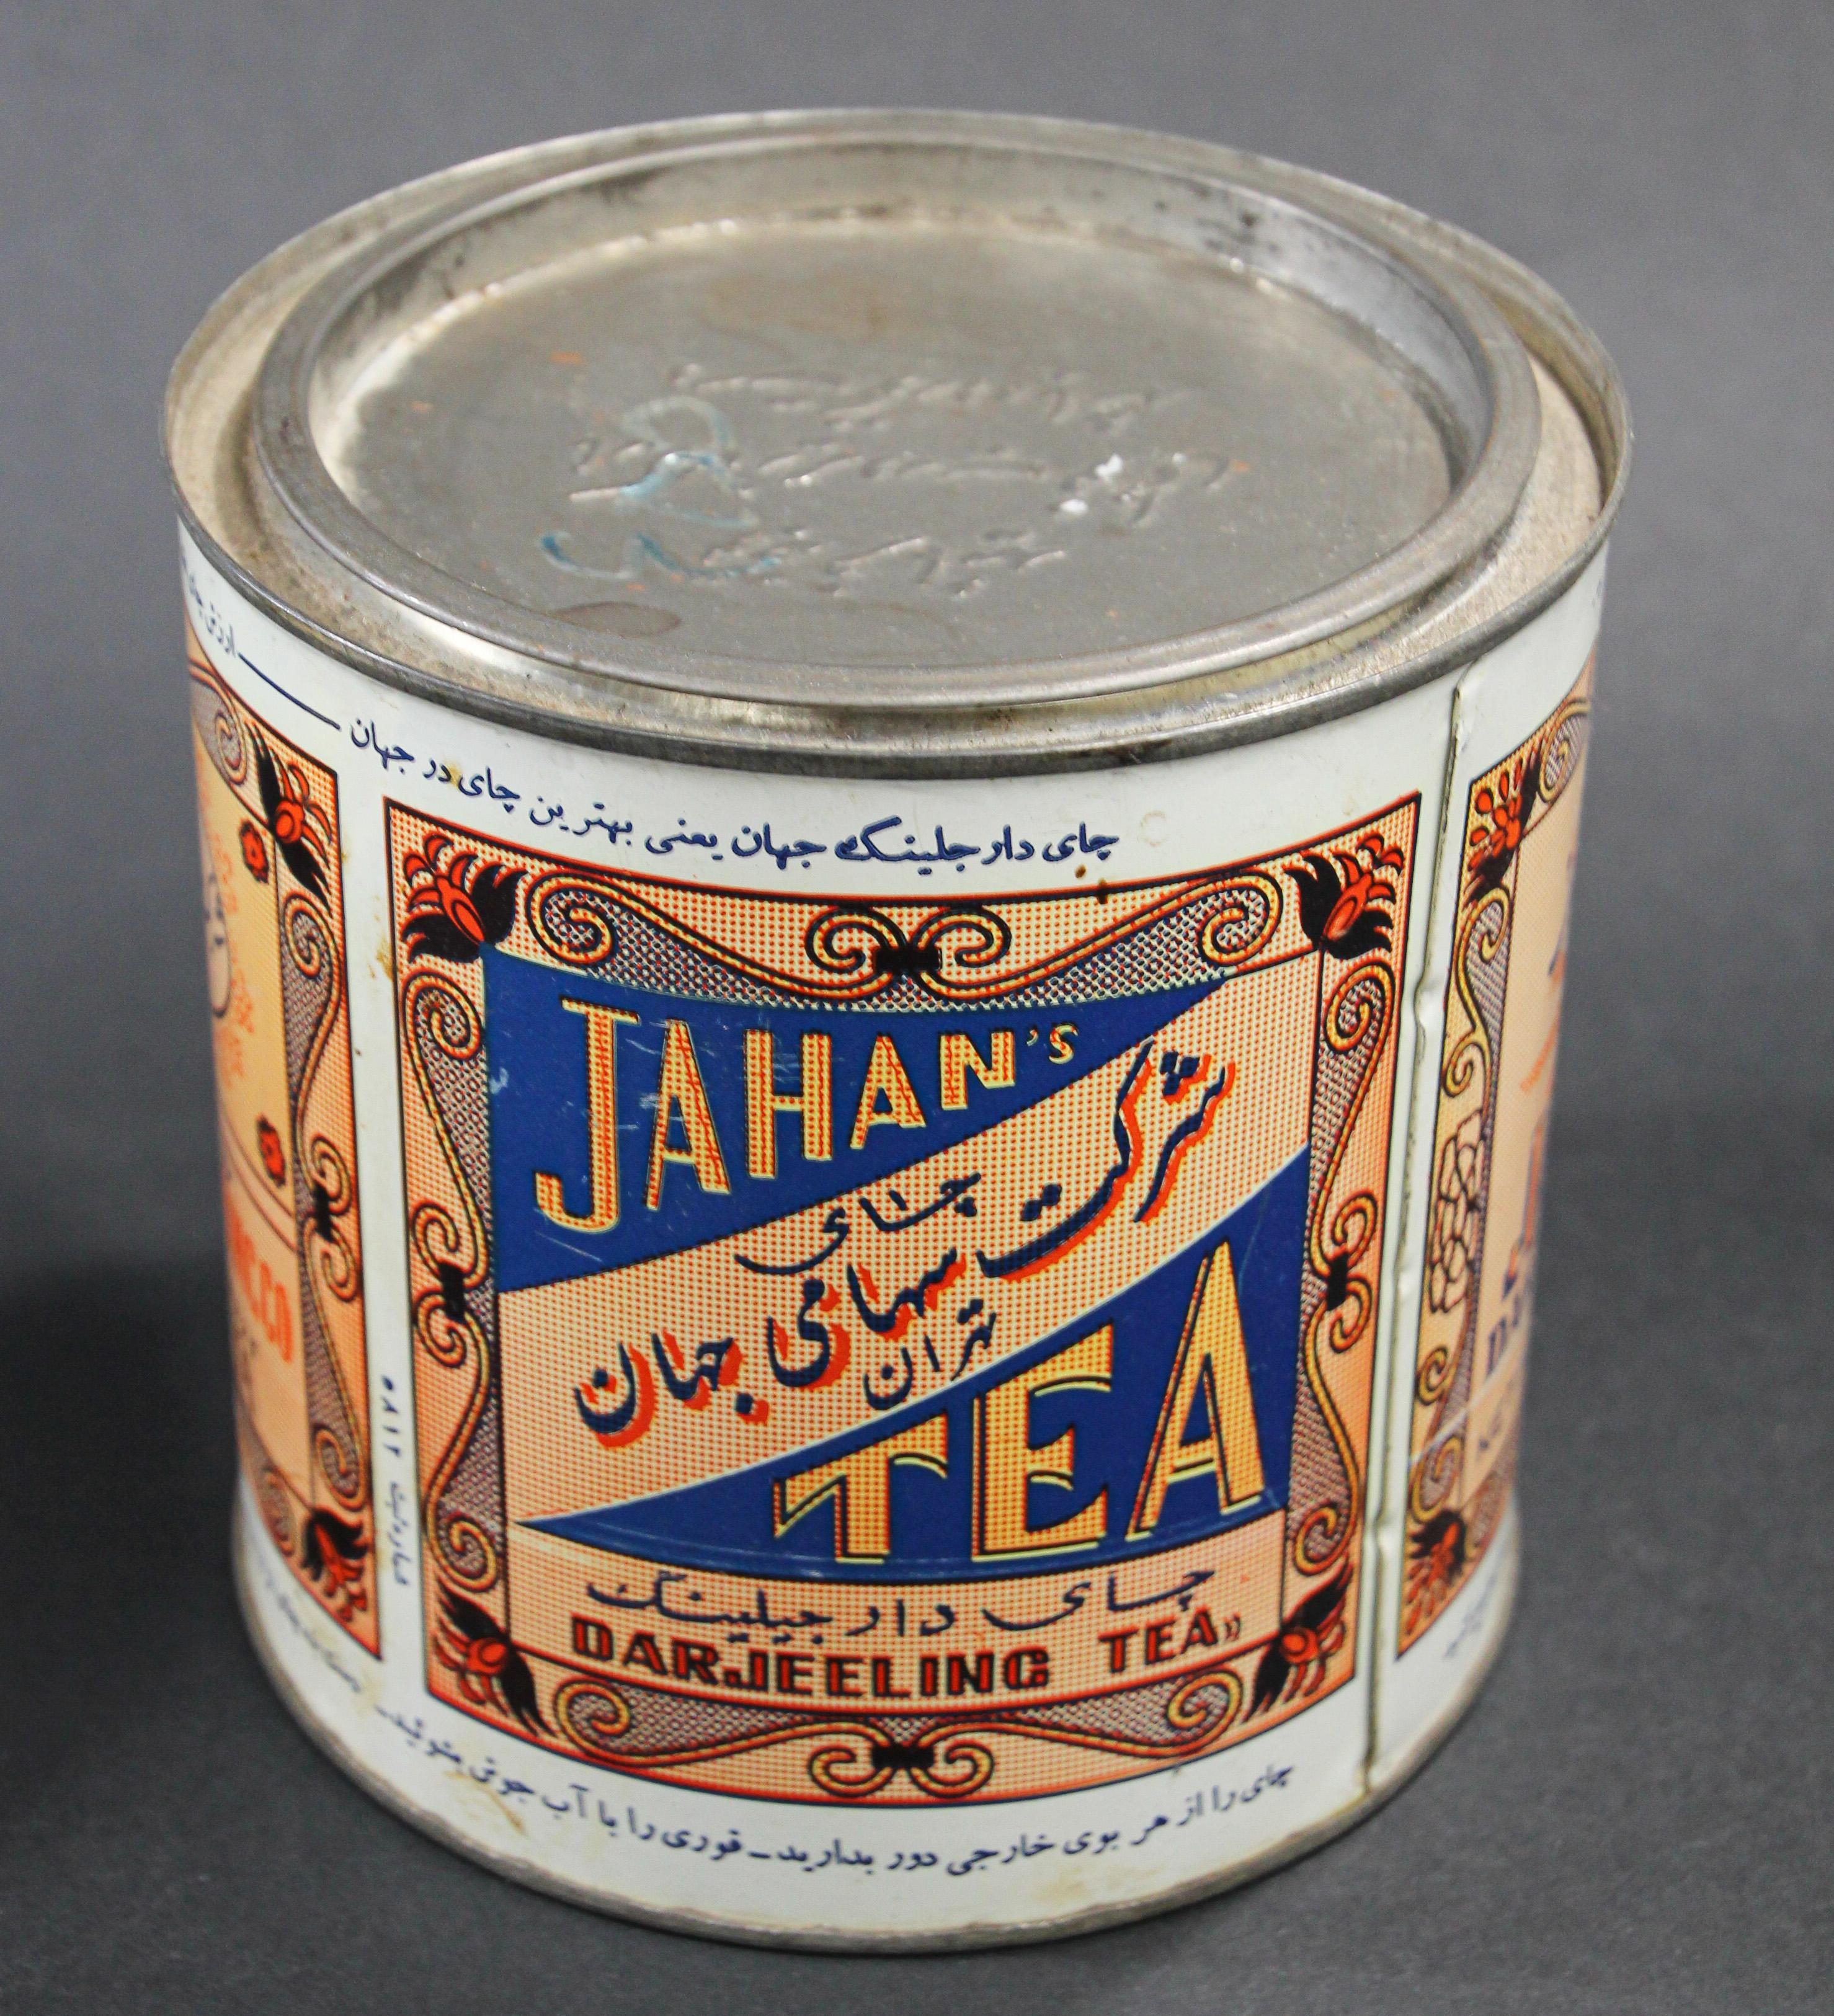 Vintage Collectible Tin Canister Jahan's Darjeeling Tea from India 4